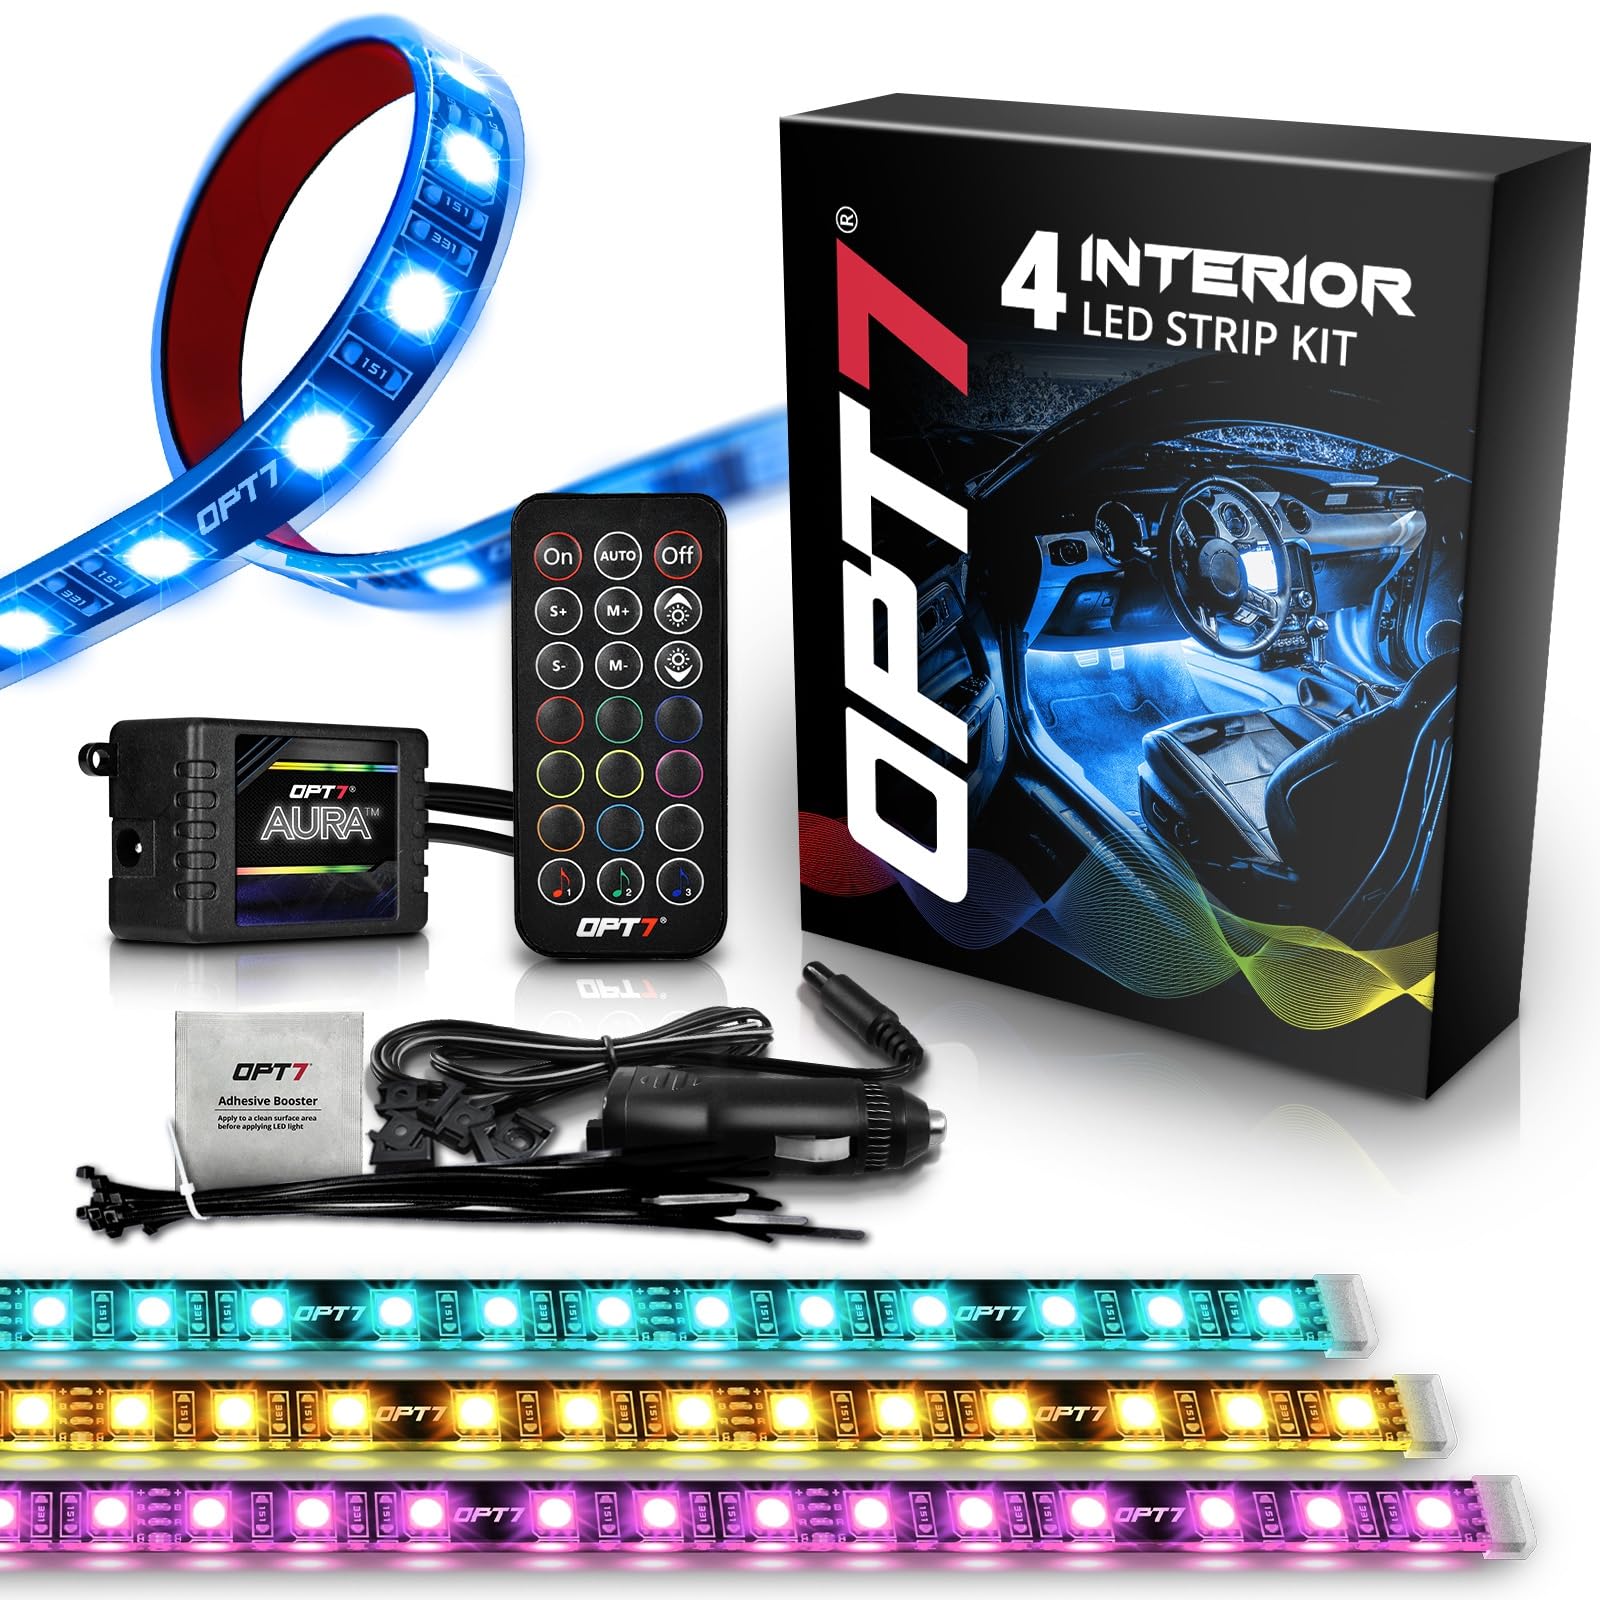 Book Cover OPT7 Aura Interior Car Lights LED Strip Kit-16+ Smart-Color, Soundsync, Door Assist, Show Patterns, and Remote-Accent Underdash Footwell Floor, 4pc Single Row